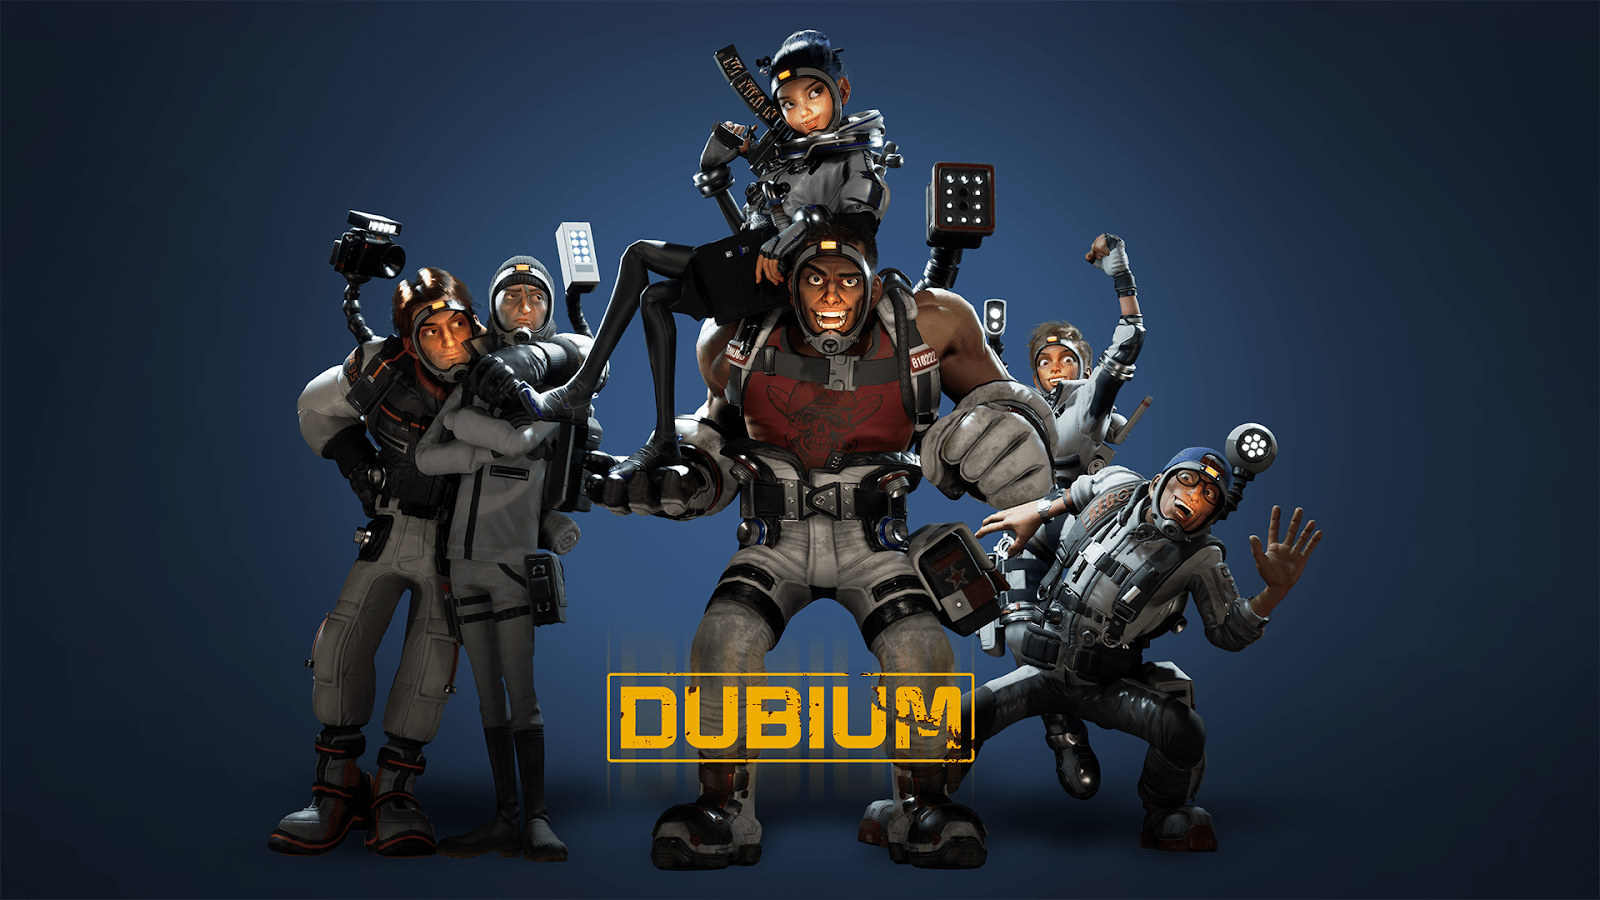 #
      Five-player survival deception game DUBIUM launches in Early Access on June 14